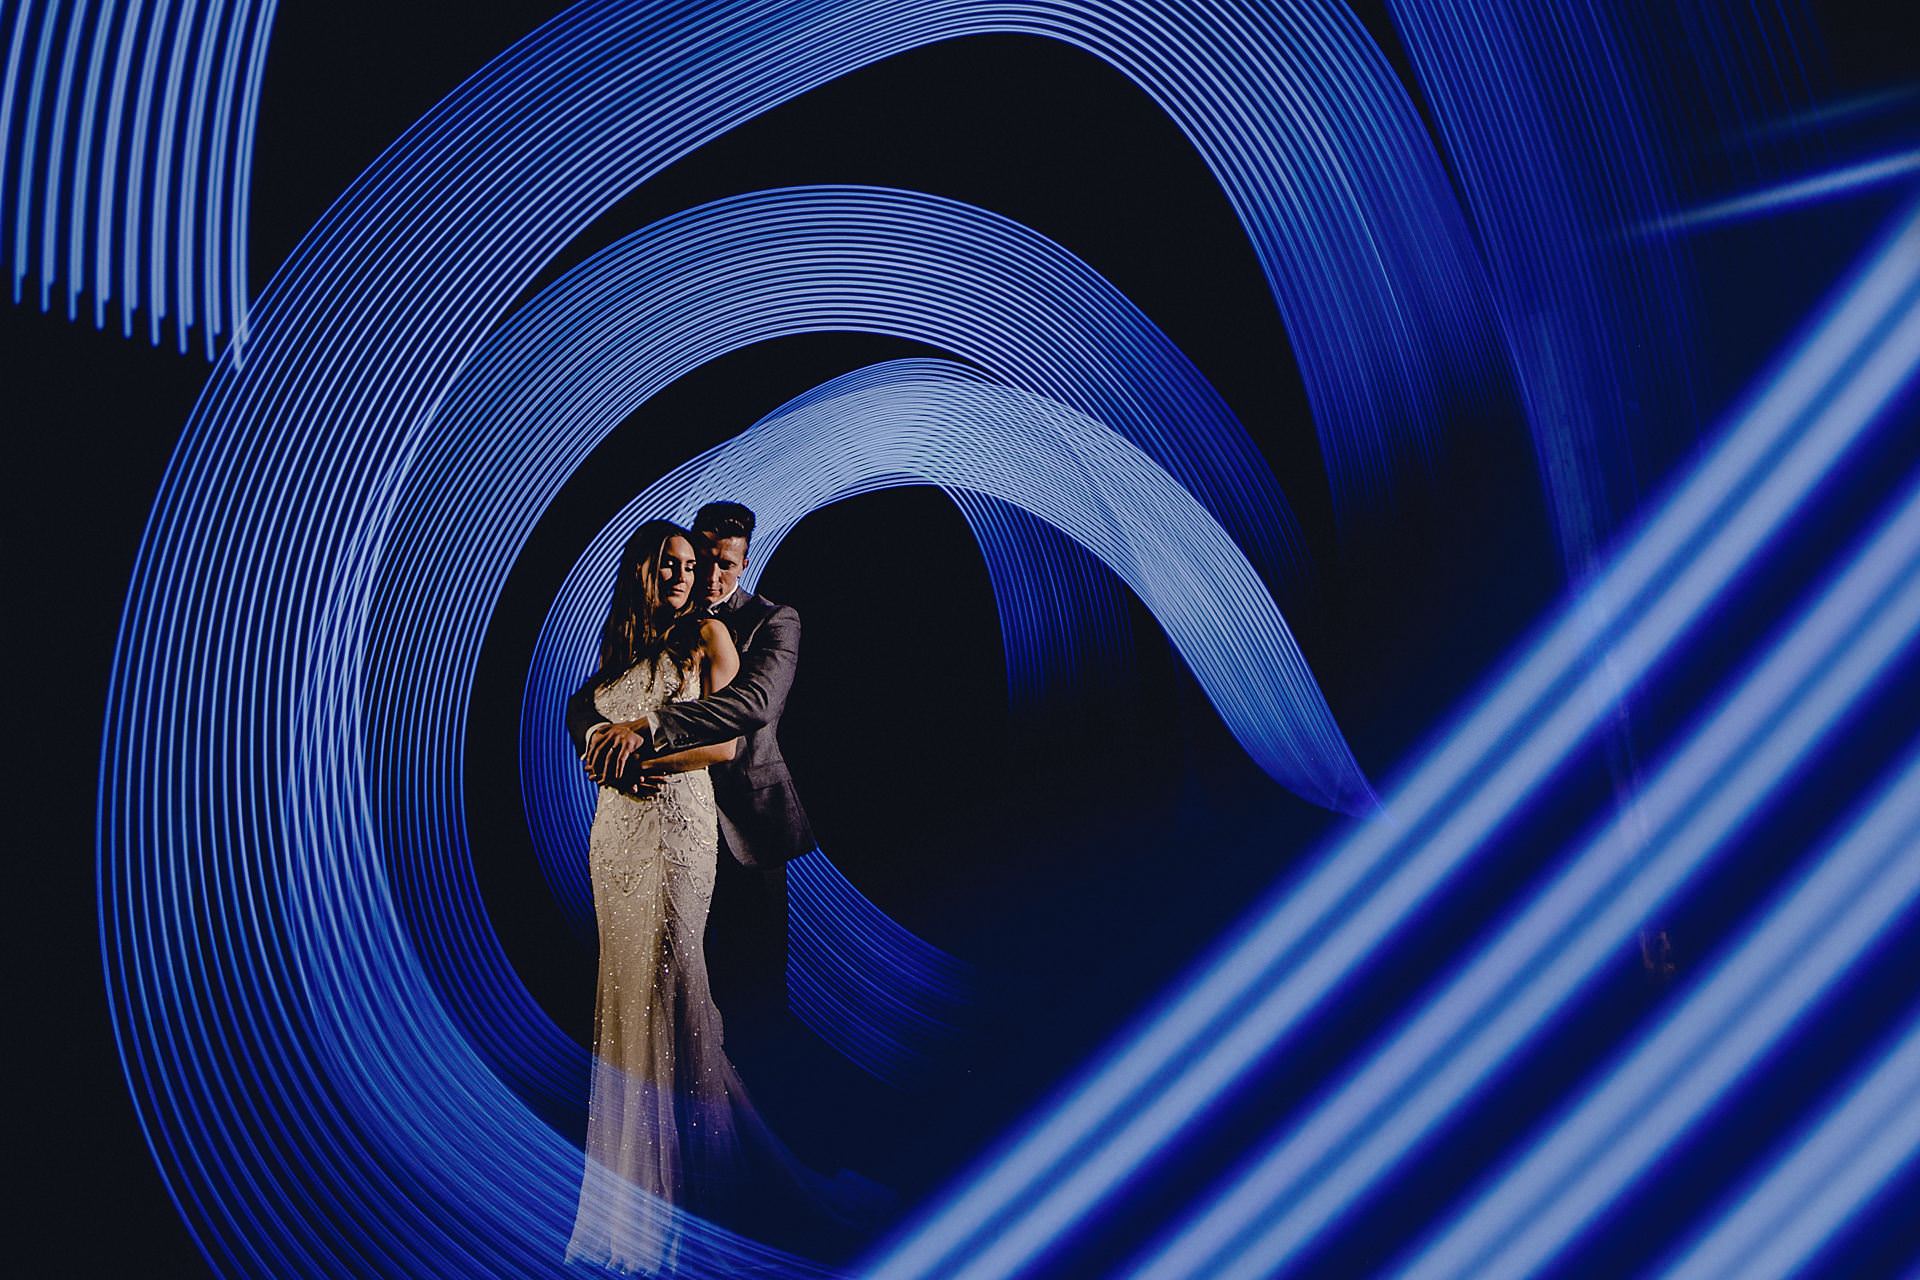 light painting wedding photo at victoria warehouse. long exposure, yongnuo ice light, canon cameras